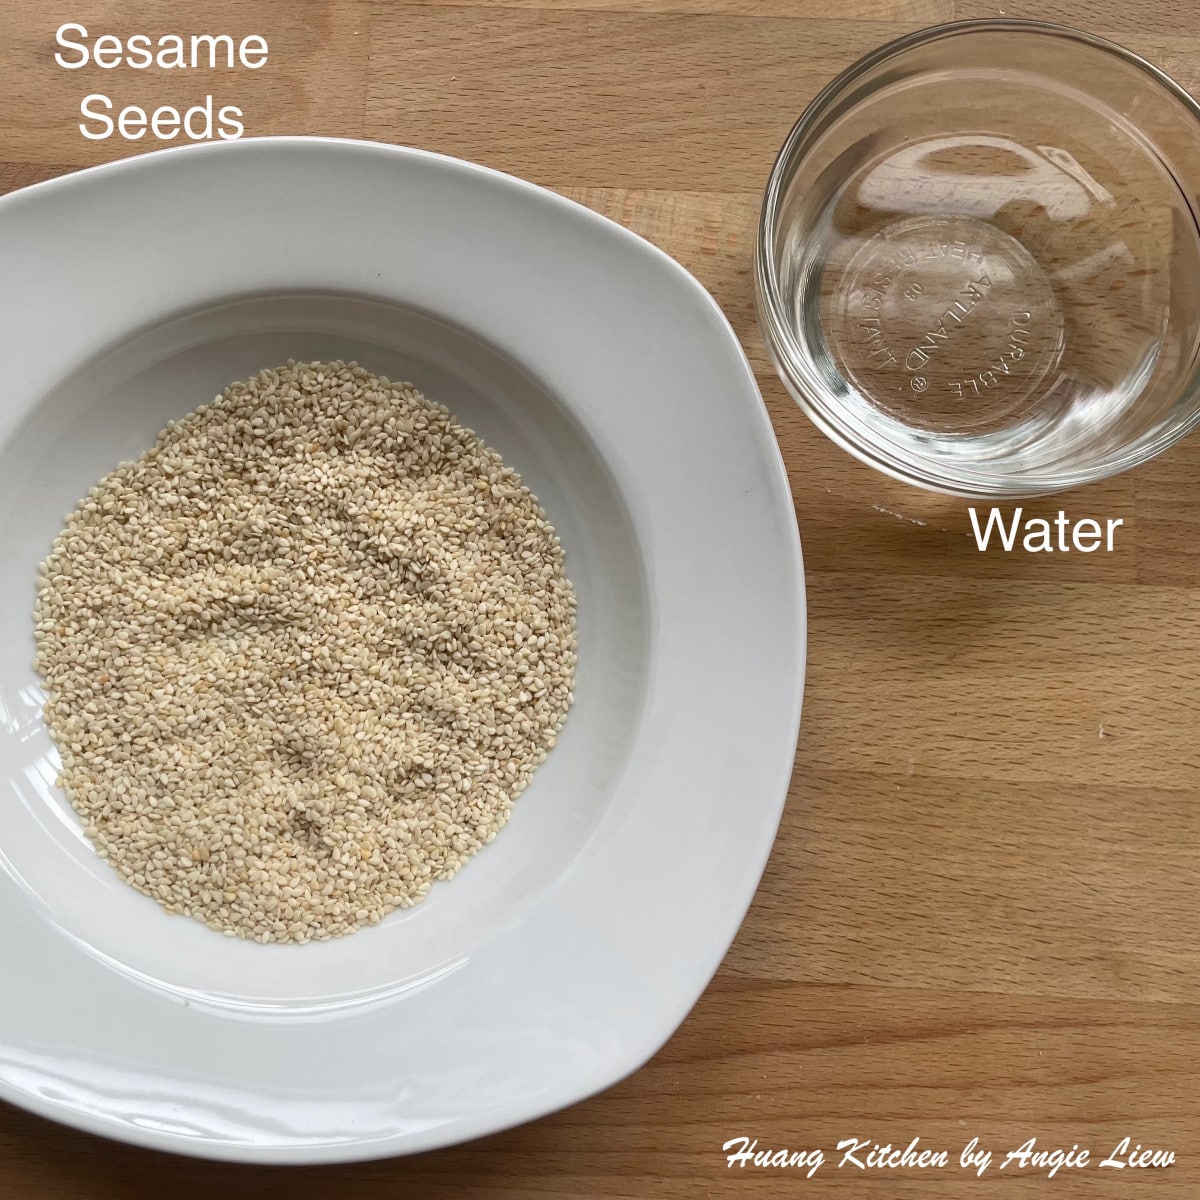 Prepare sesame seeds and water.